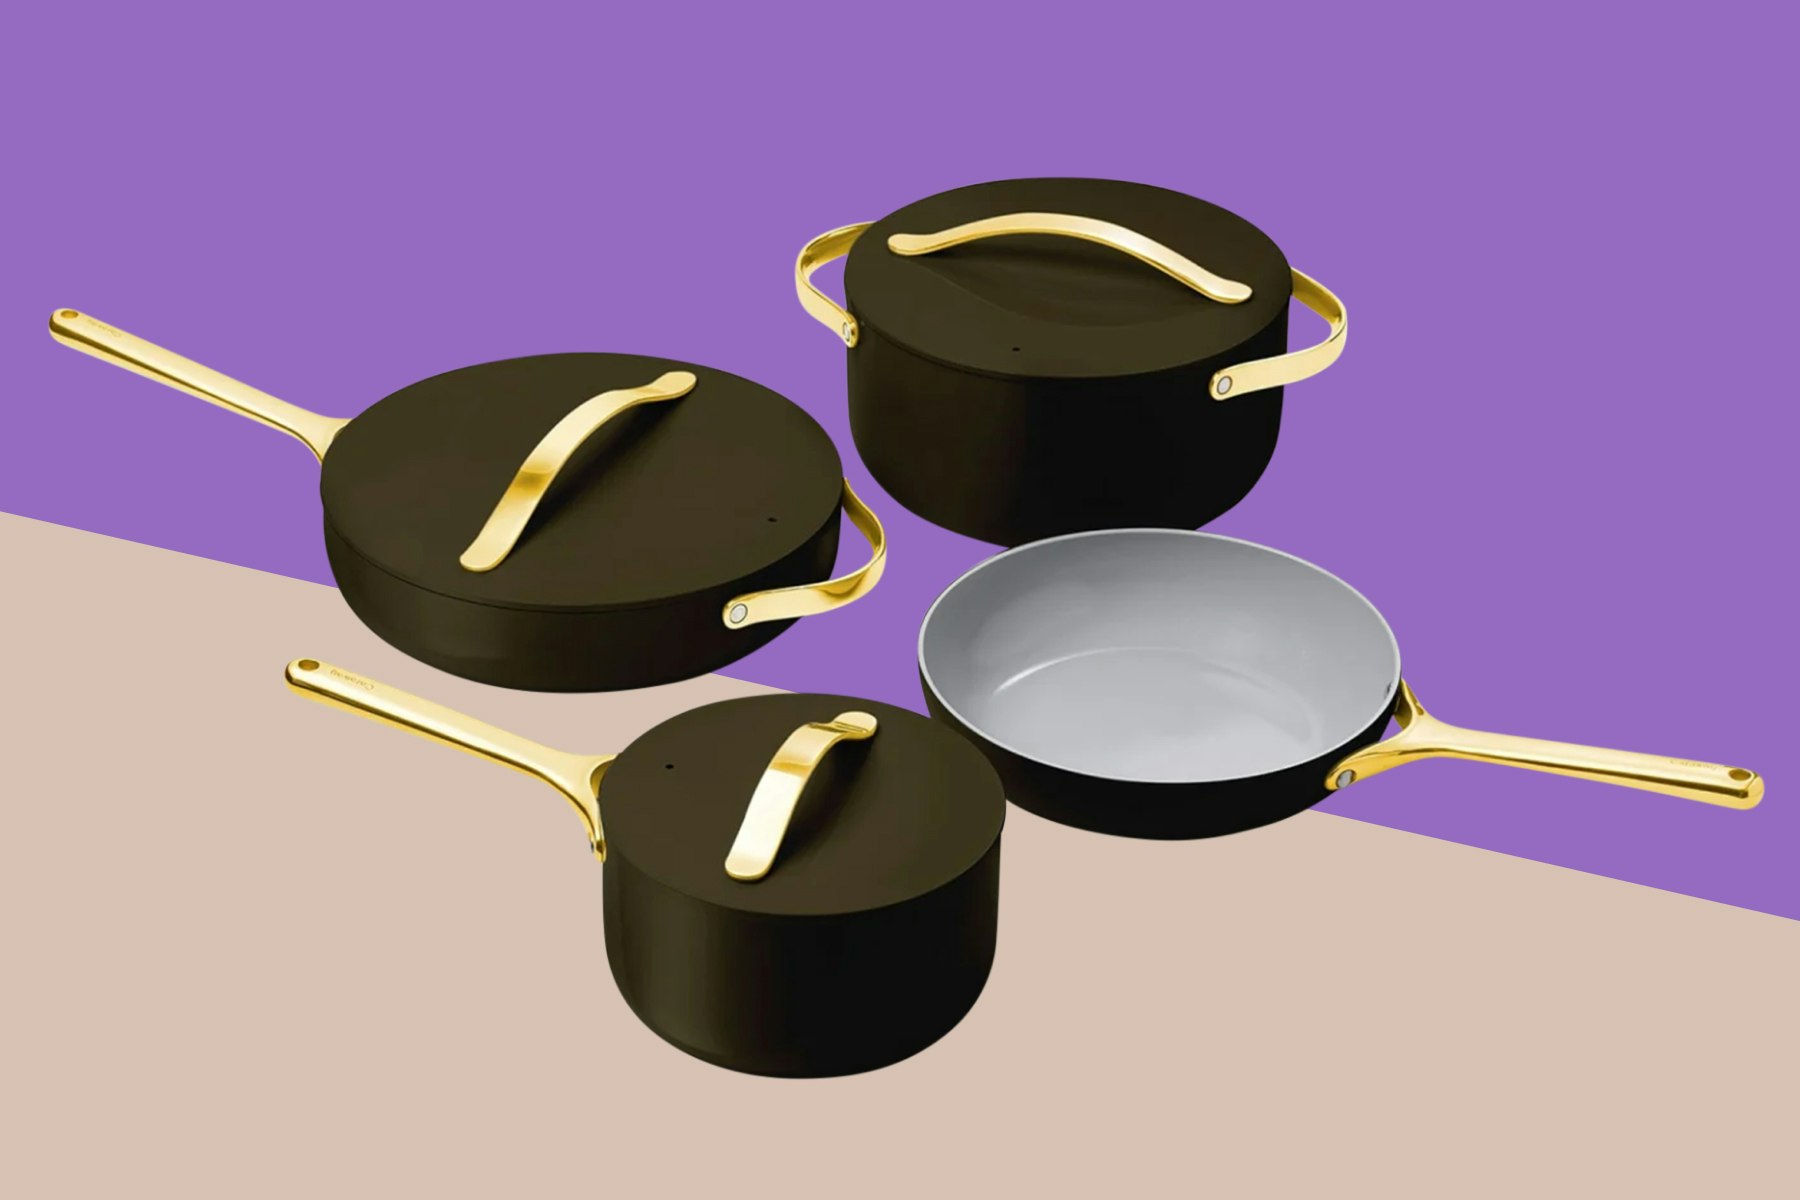 Caraway's stylish cookware sets and prep kits are 20% off now in